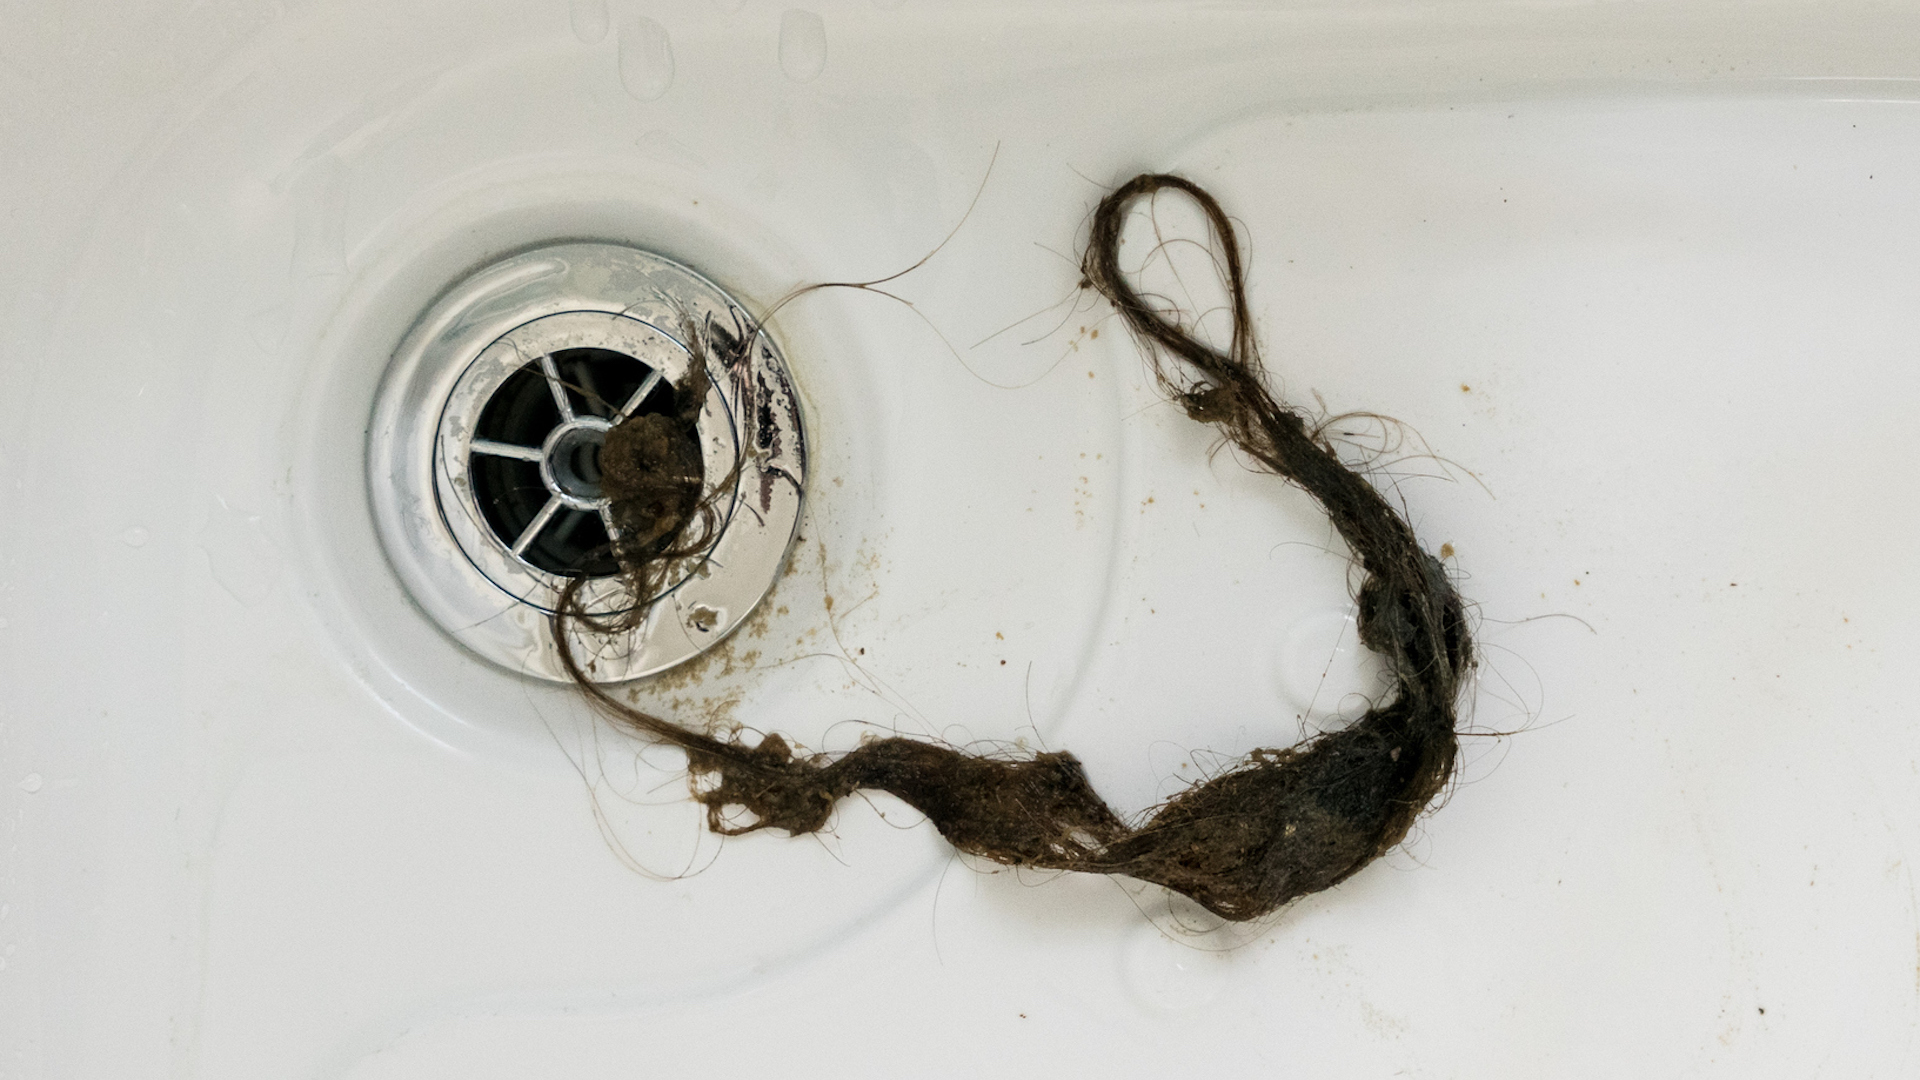 A plughole blocked with long hair